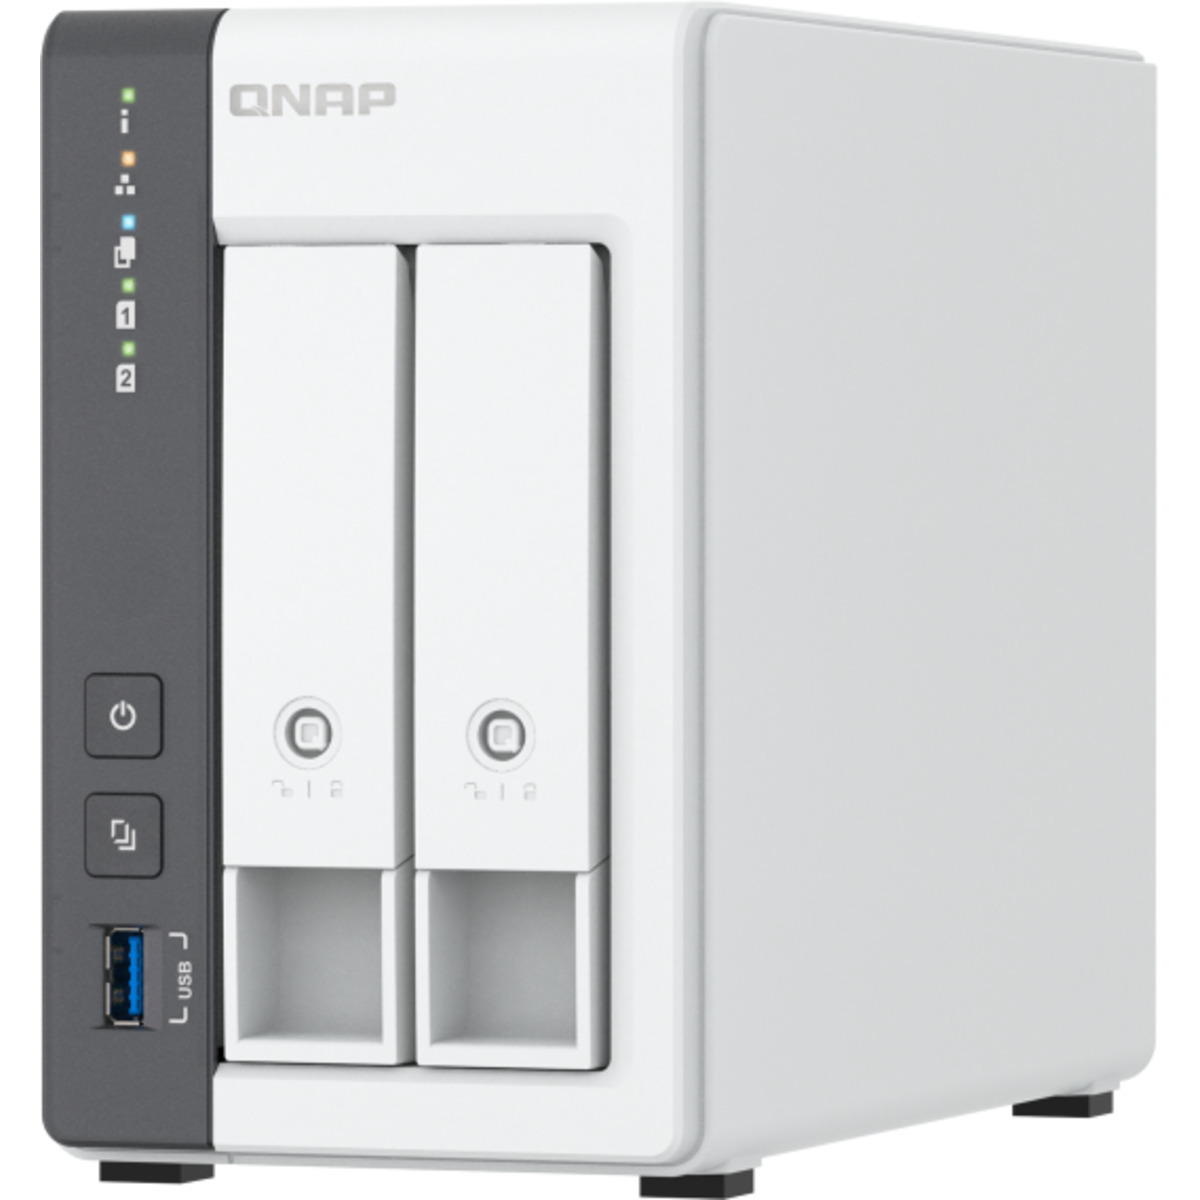 QNAP TS-216G 28tb 2-Bay Desktop Personal / Basic Home / Small Office NAS - Network Attached Storage Device 2x14tb Seagate EXOS X18 ST14000NM000J 3.5 7200rpm SATA 6Gb/s HDD ENTERPRISE Class Drives Installed - Burn-In Tested TS-216G